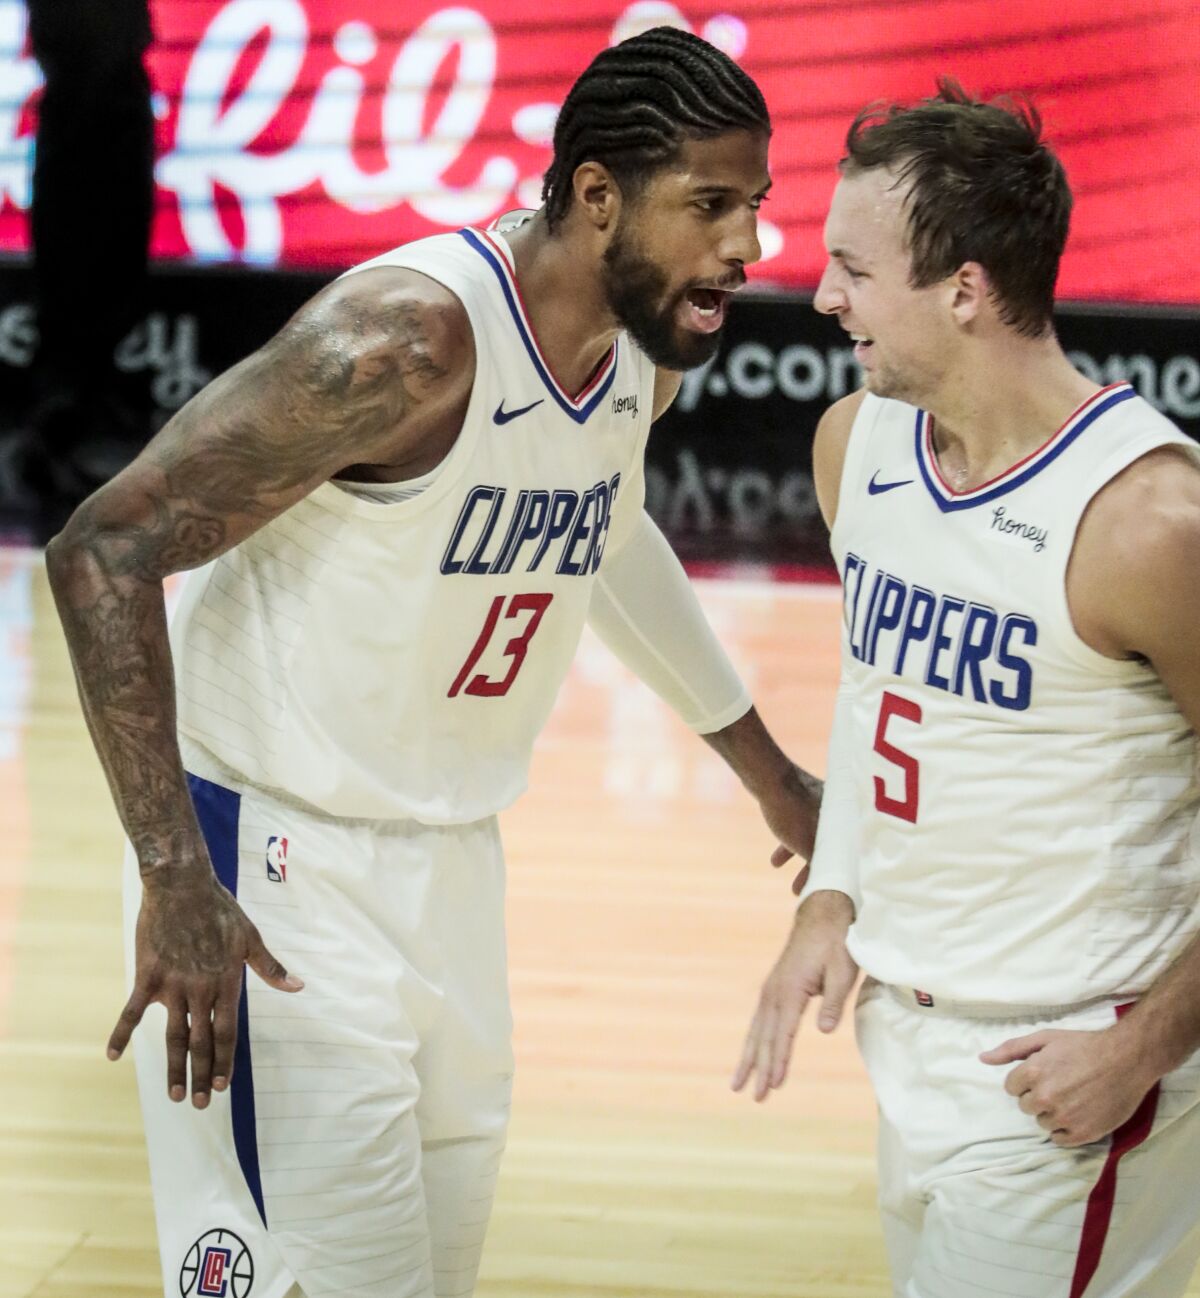 Clippers guard Paul George celebrates with guard Luke Kennard after making a three-point shot.